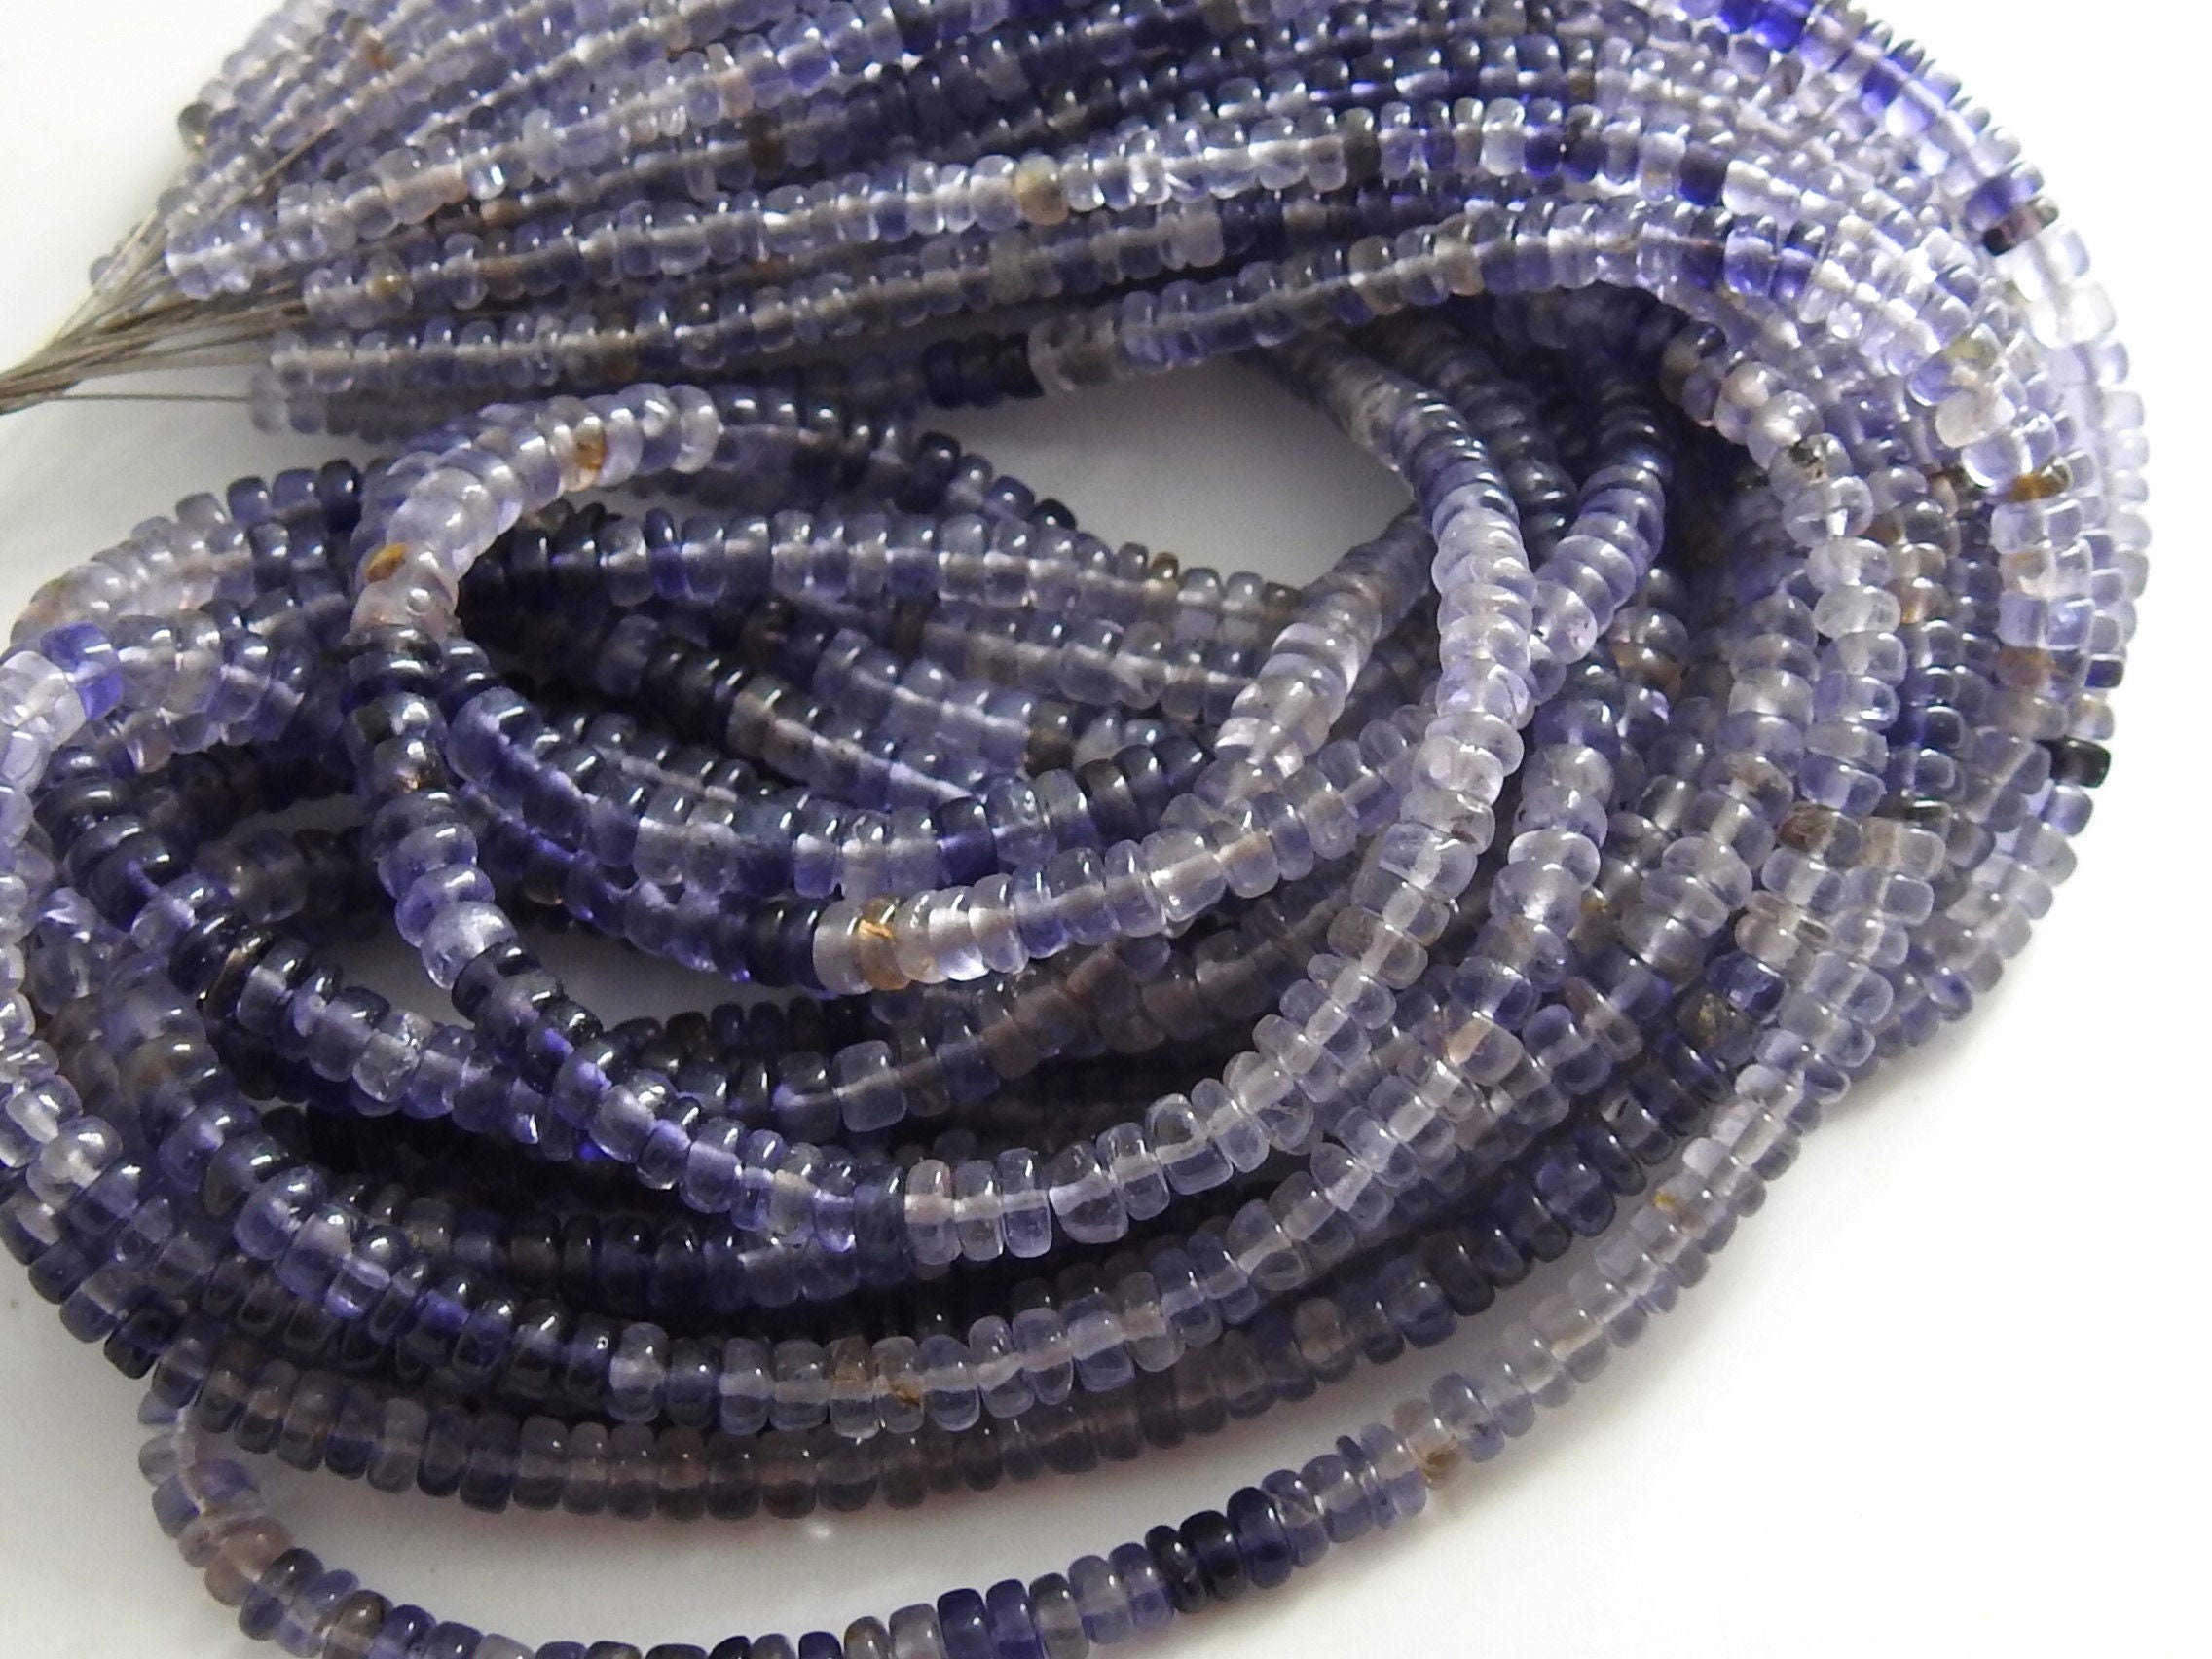 Iolite Smooth Roundel Bead,Handmade,Multi Shaded,Loose Stone,Necklace,For Making Jewelry,Blue,Wholesaler 16Inch 4MM Approx 100%Natural B10 | Save 33% - Rajasthan Living 23